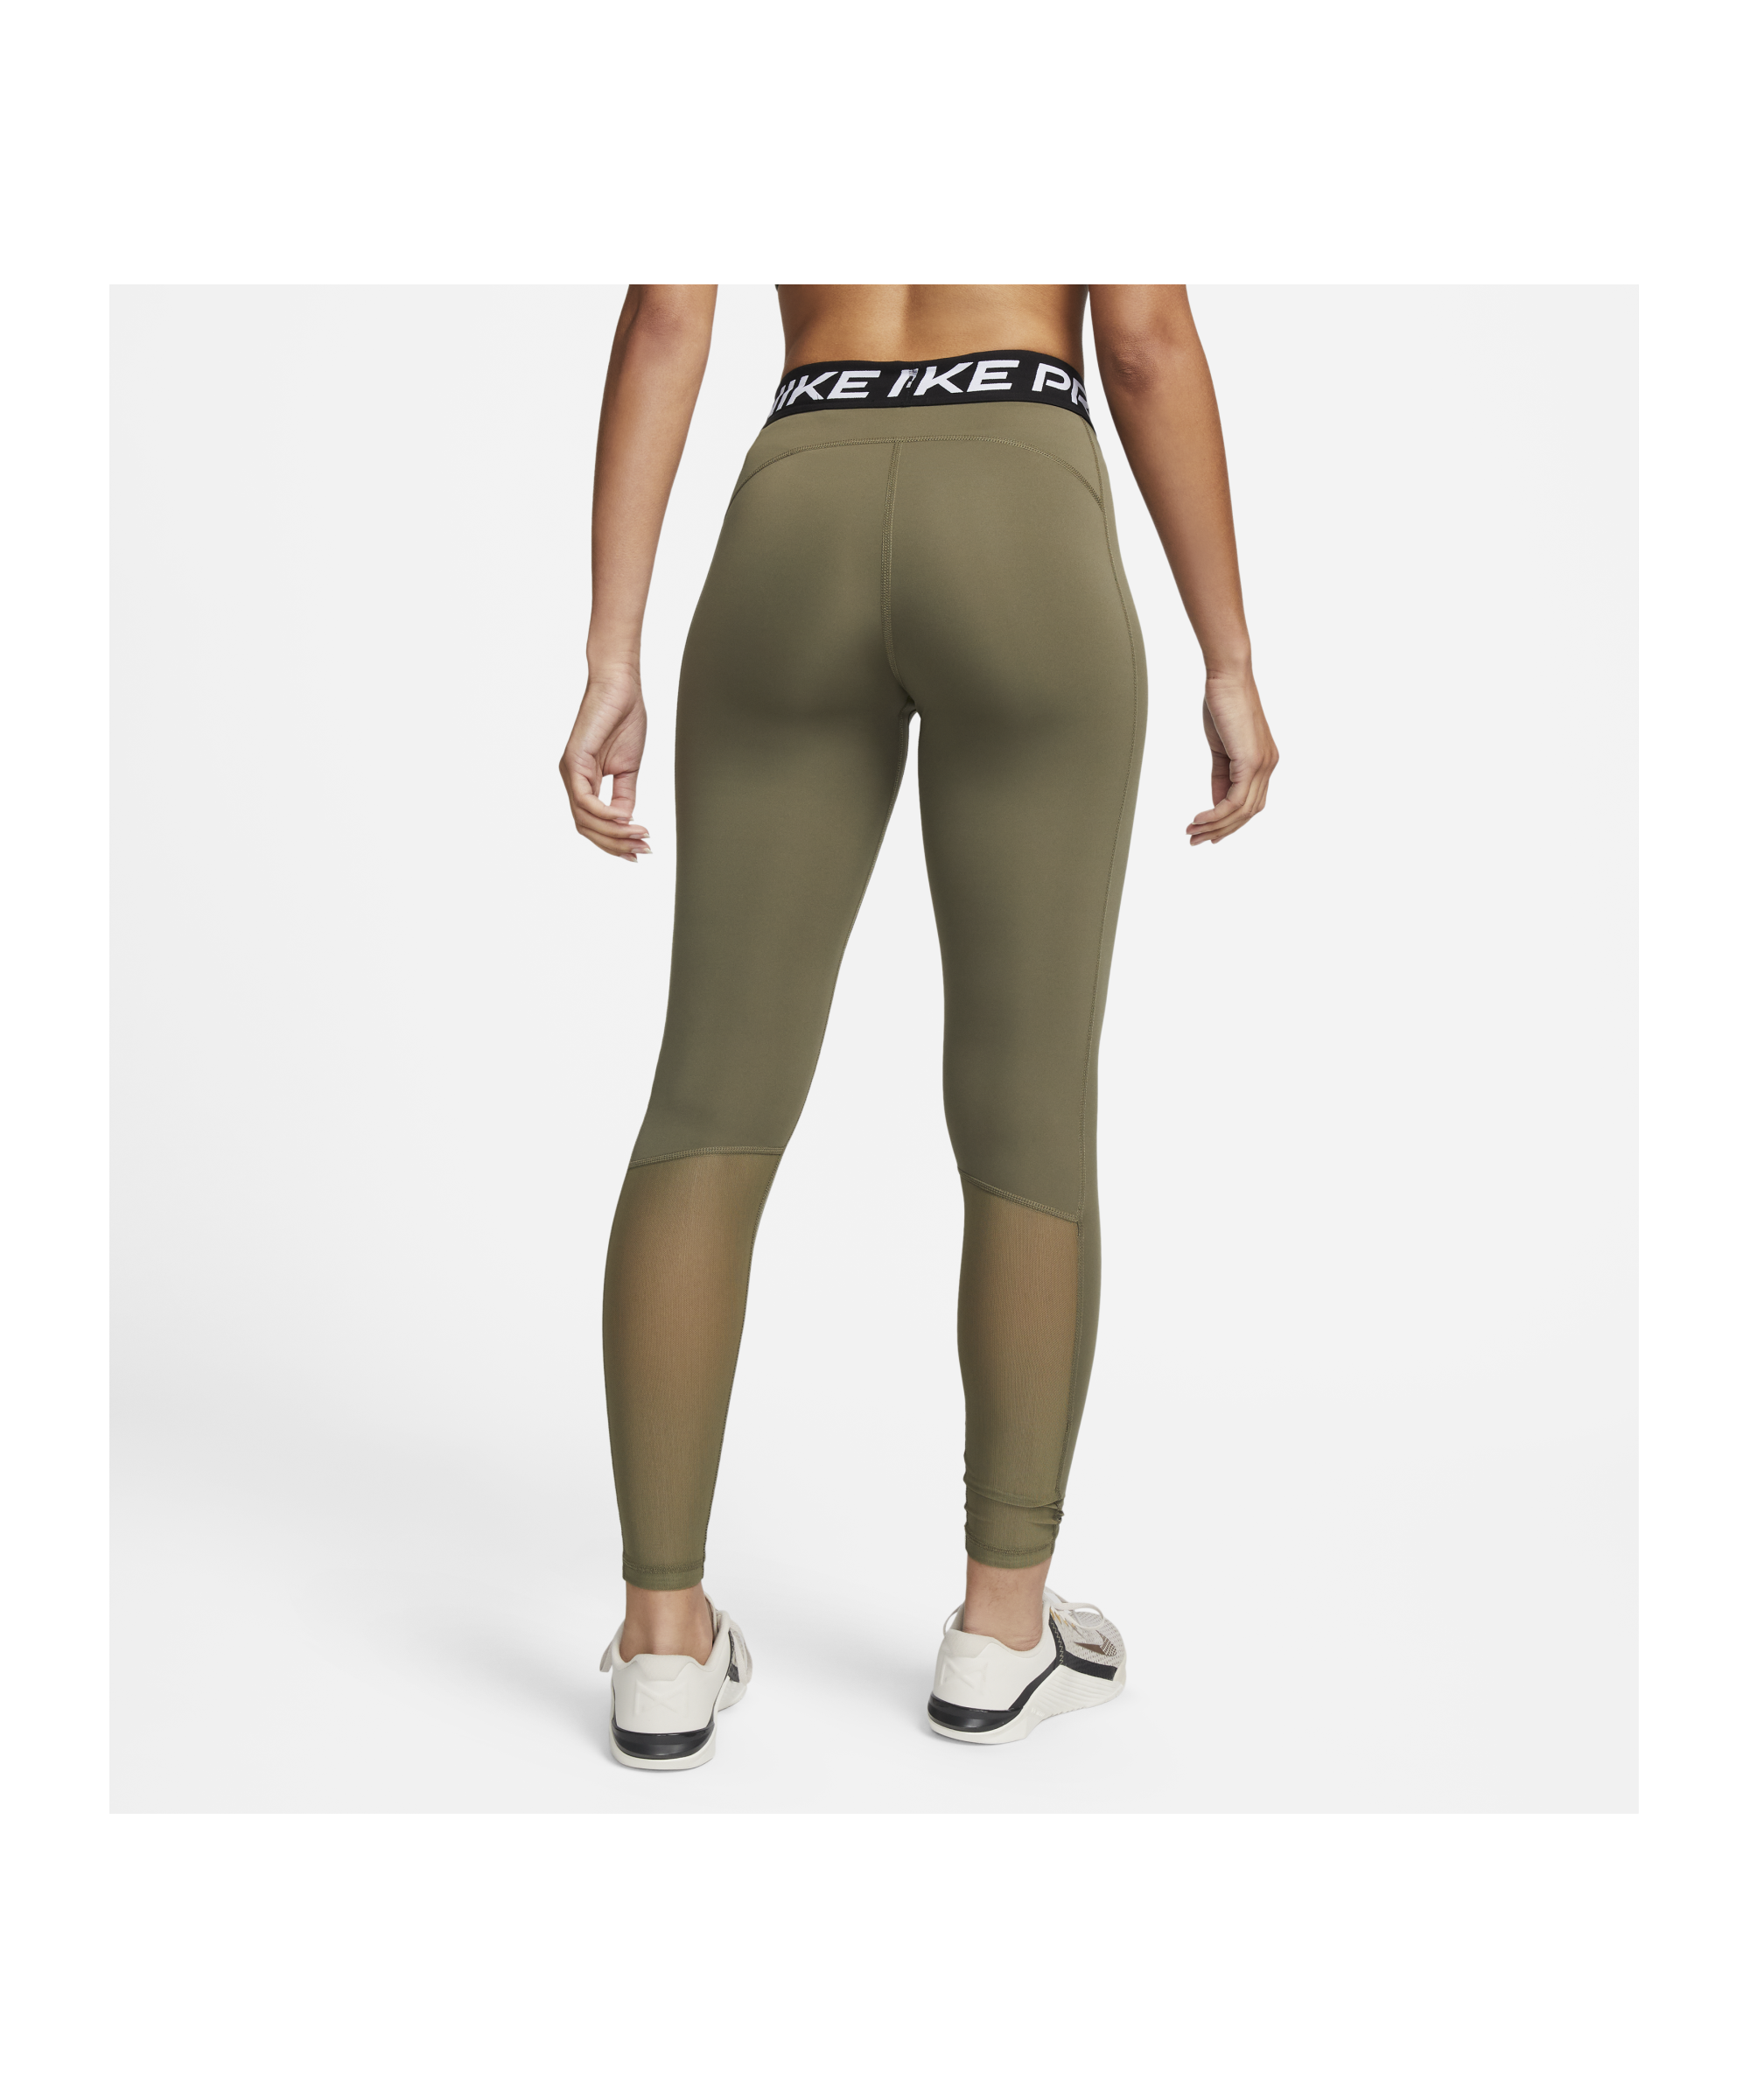 Buy Nike Pro 365 Training Tights Women from £22.95 (Today) – Best